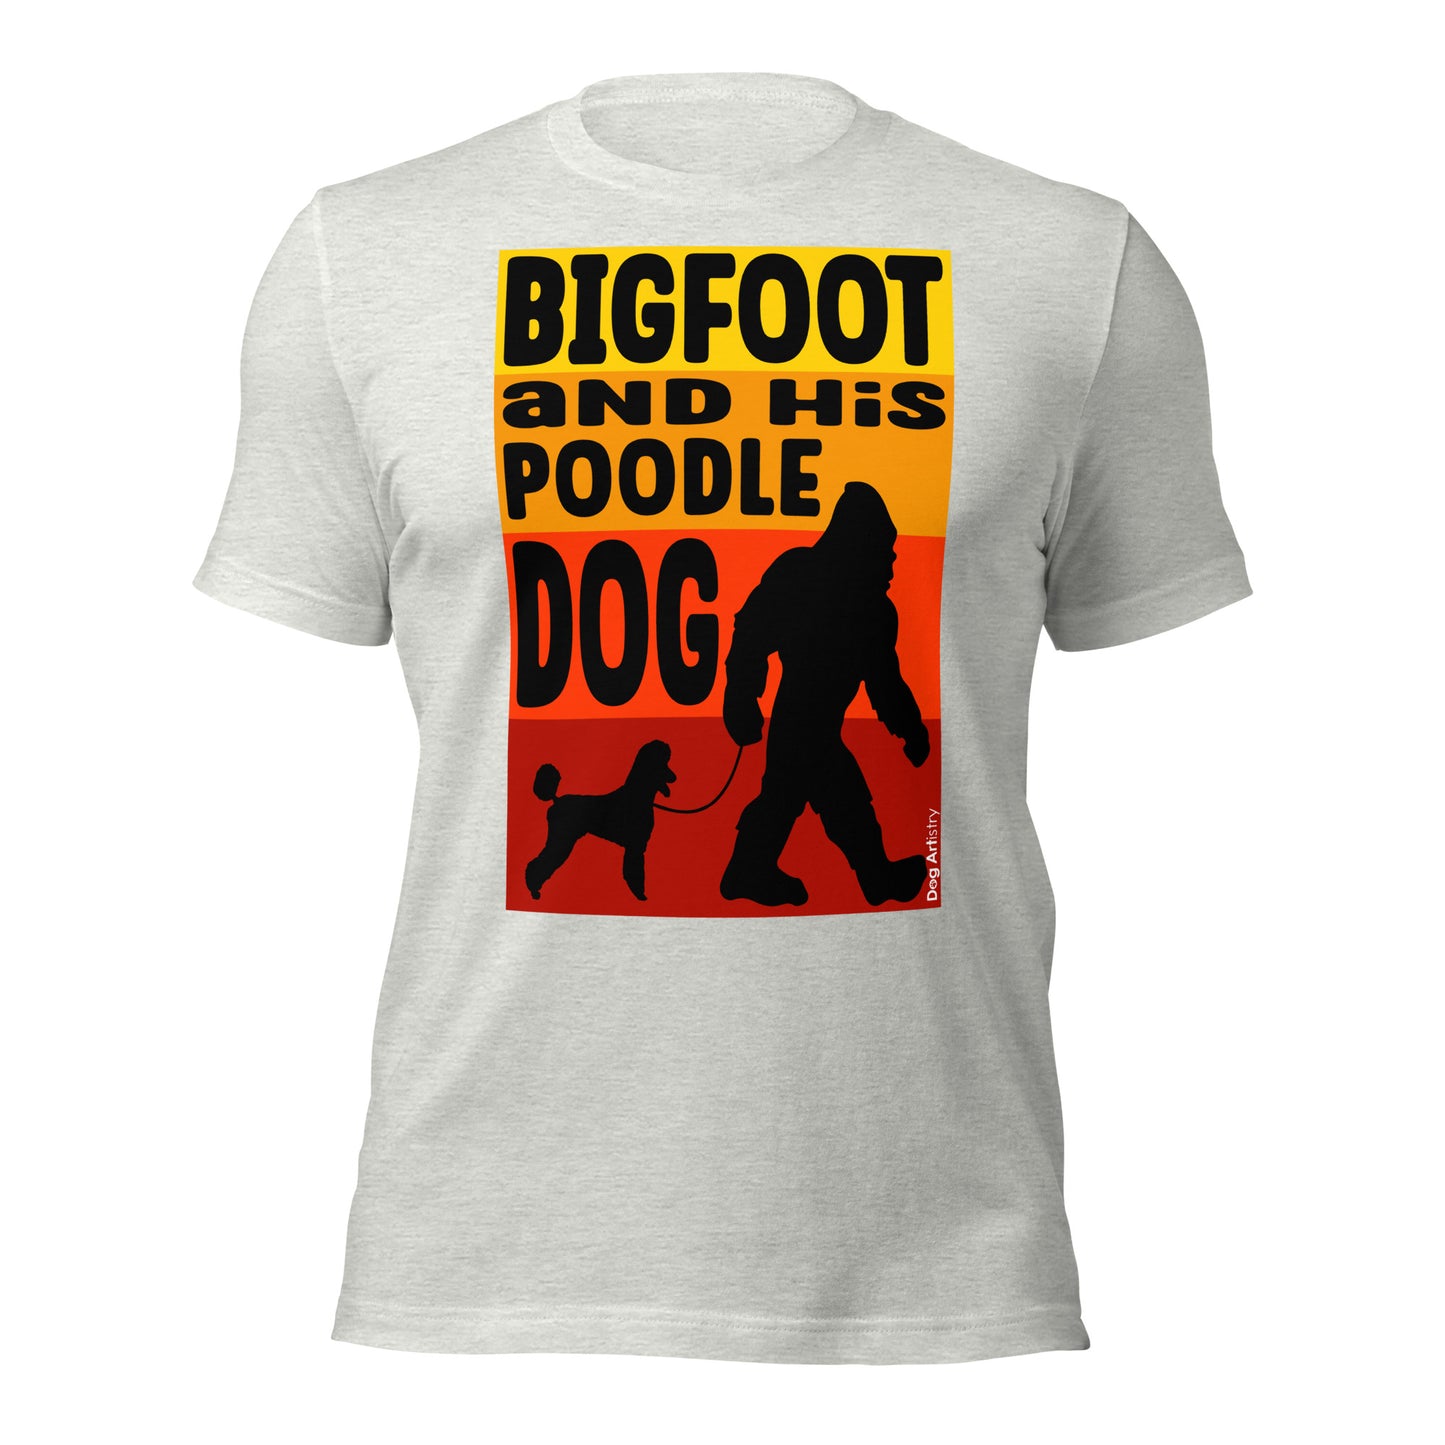 Bigfoot and his Poodle unisex white t-shirt by Dog Artistry.